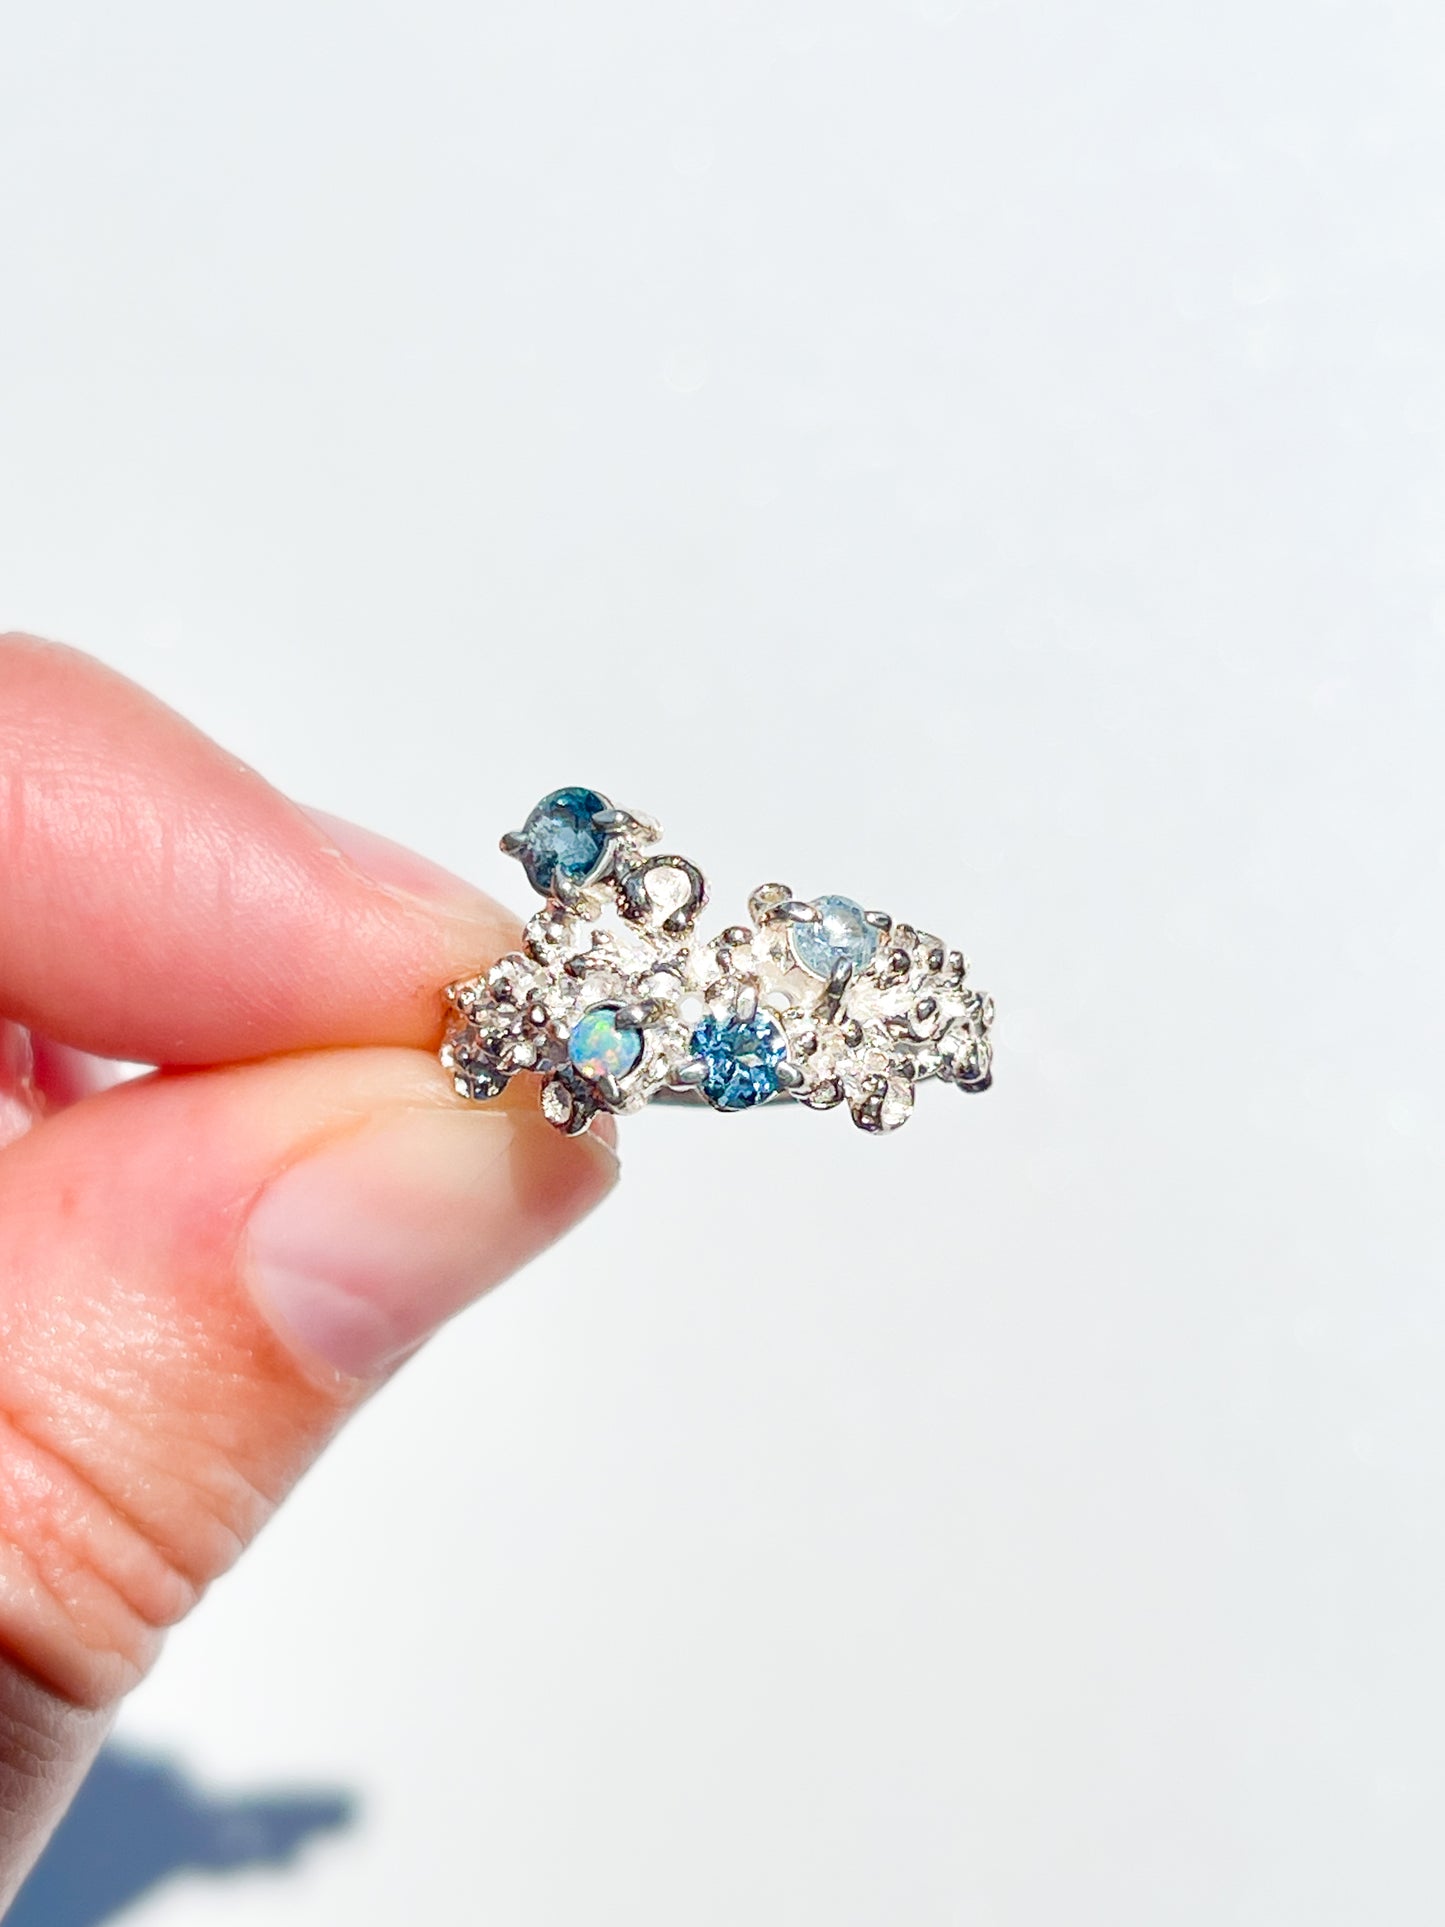 Coral Ring Silver with Blue Sapphires, Aquamarine & Opal - size 7